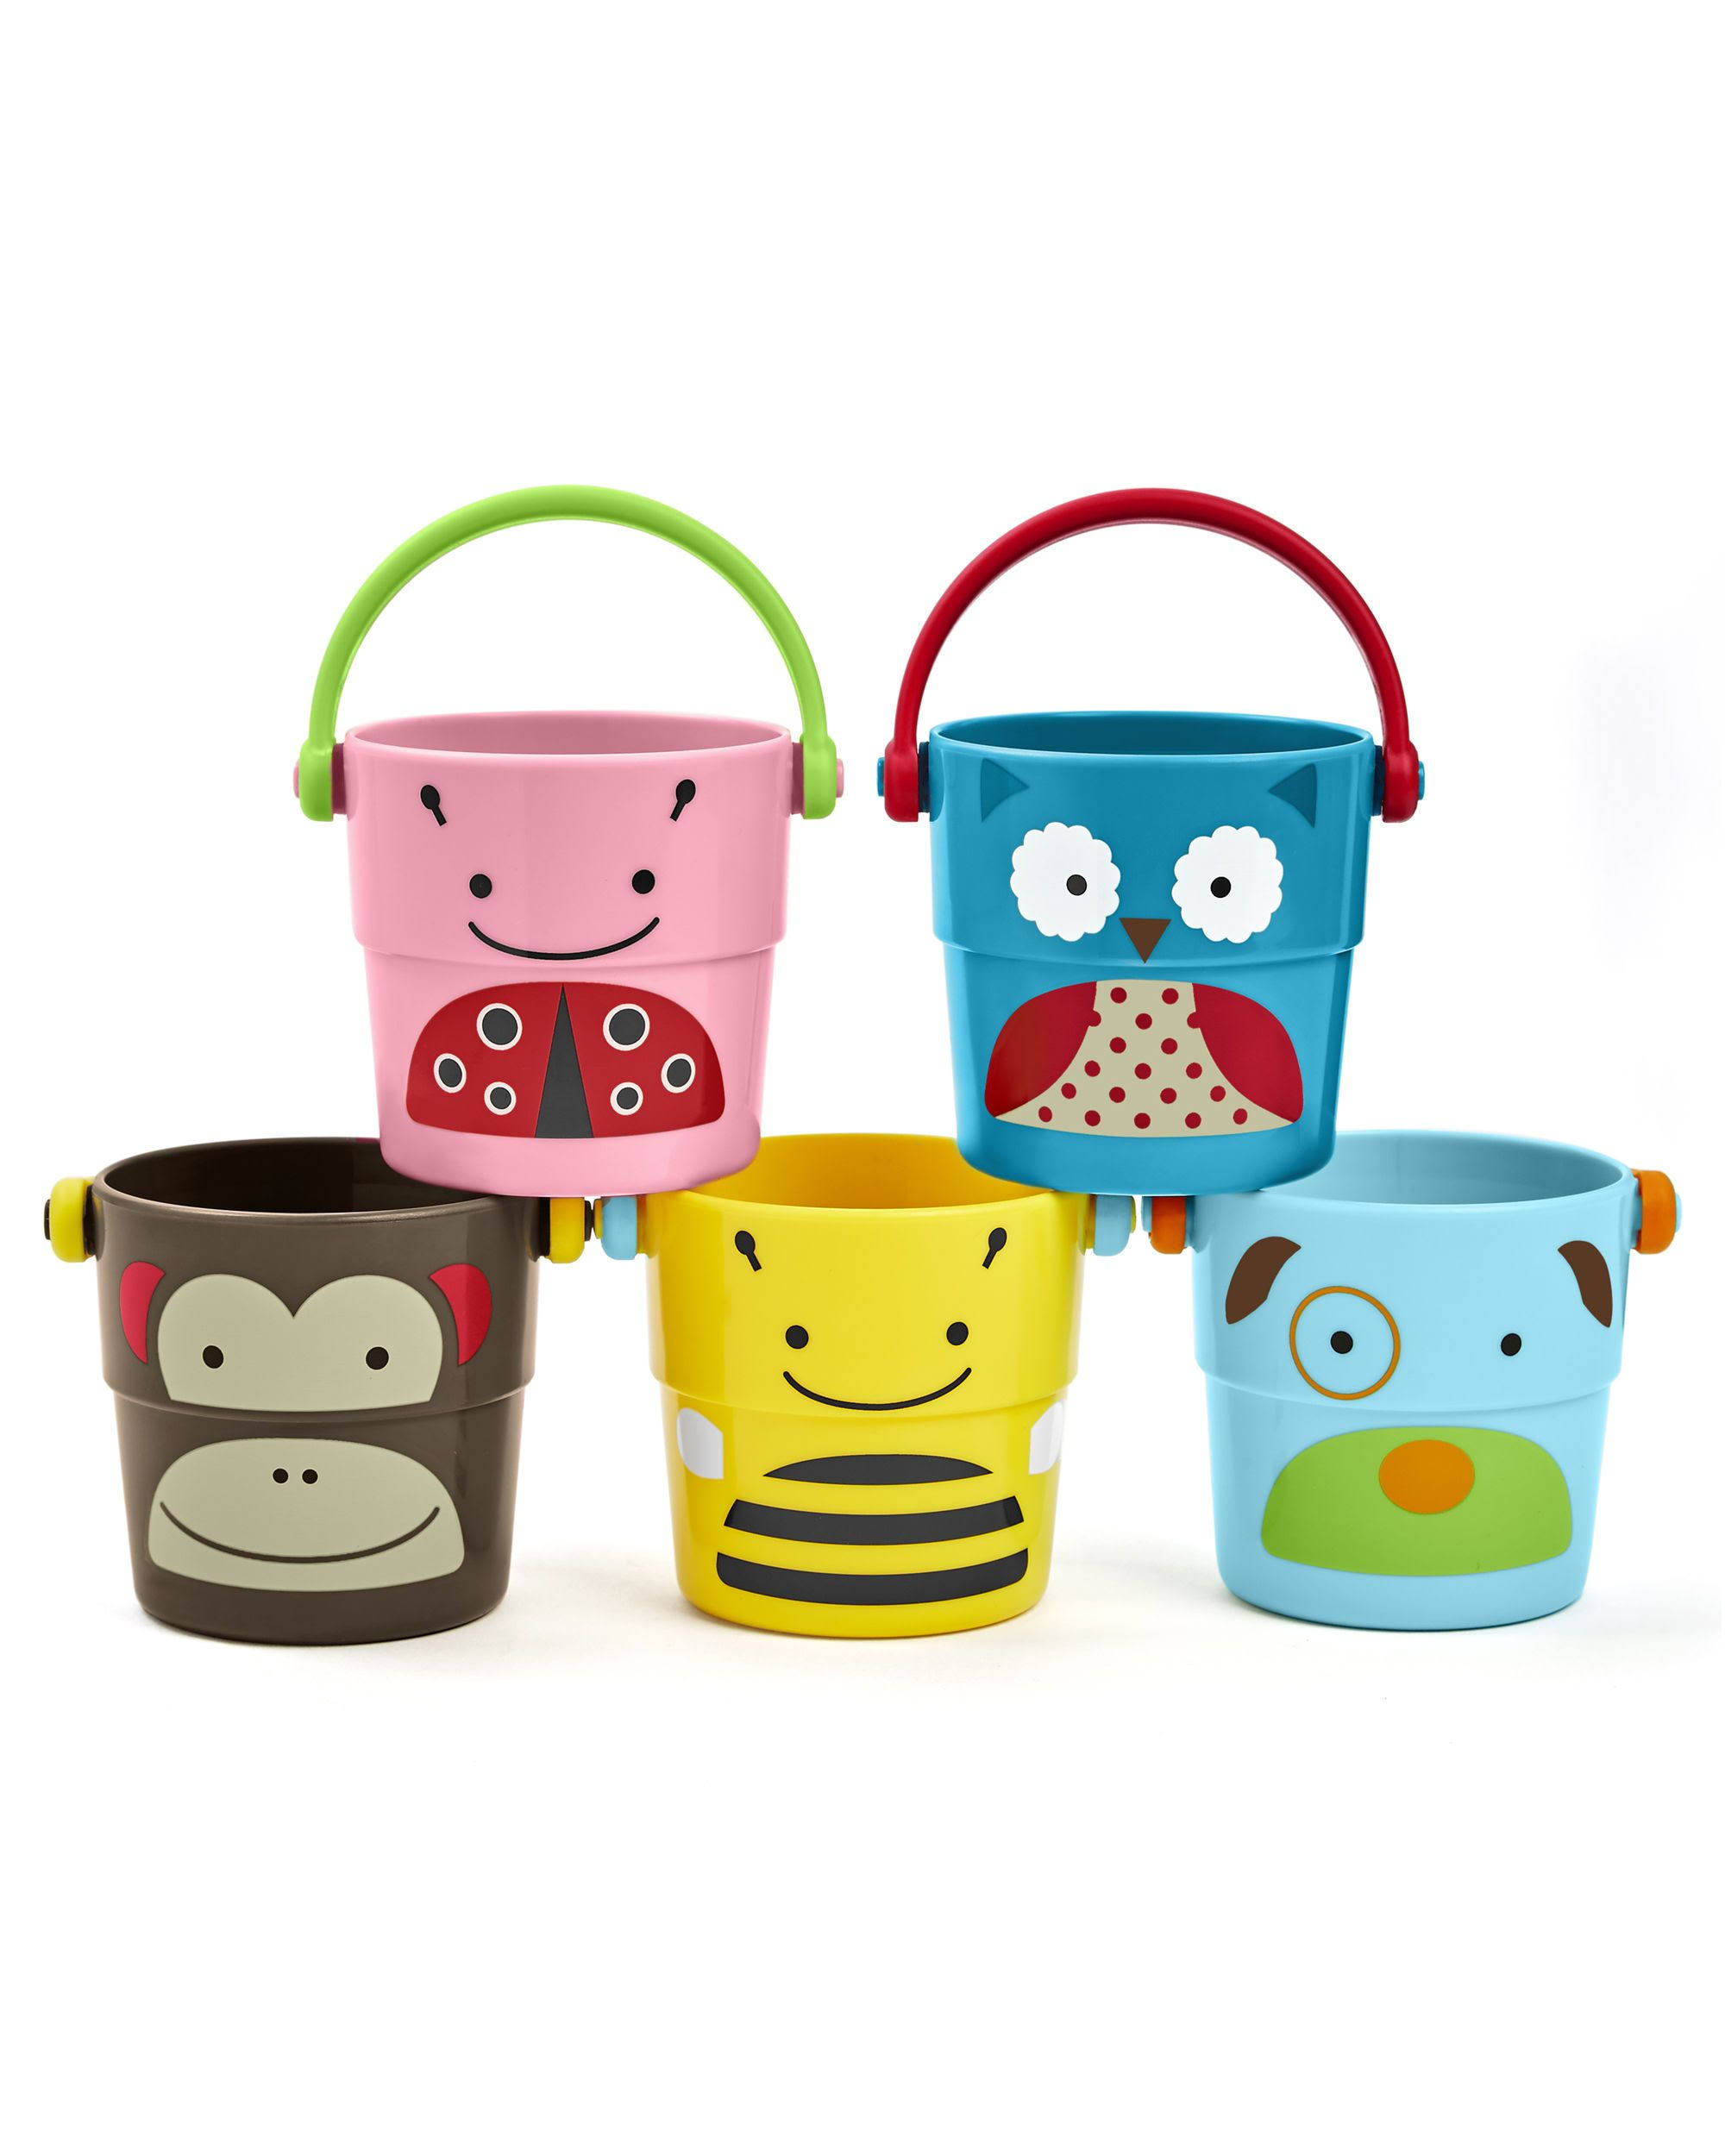 Skip Hop Zoo Stack and Pour Buckets Rinse Cups Toy